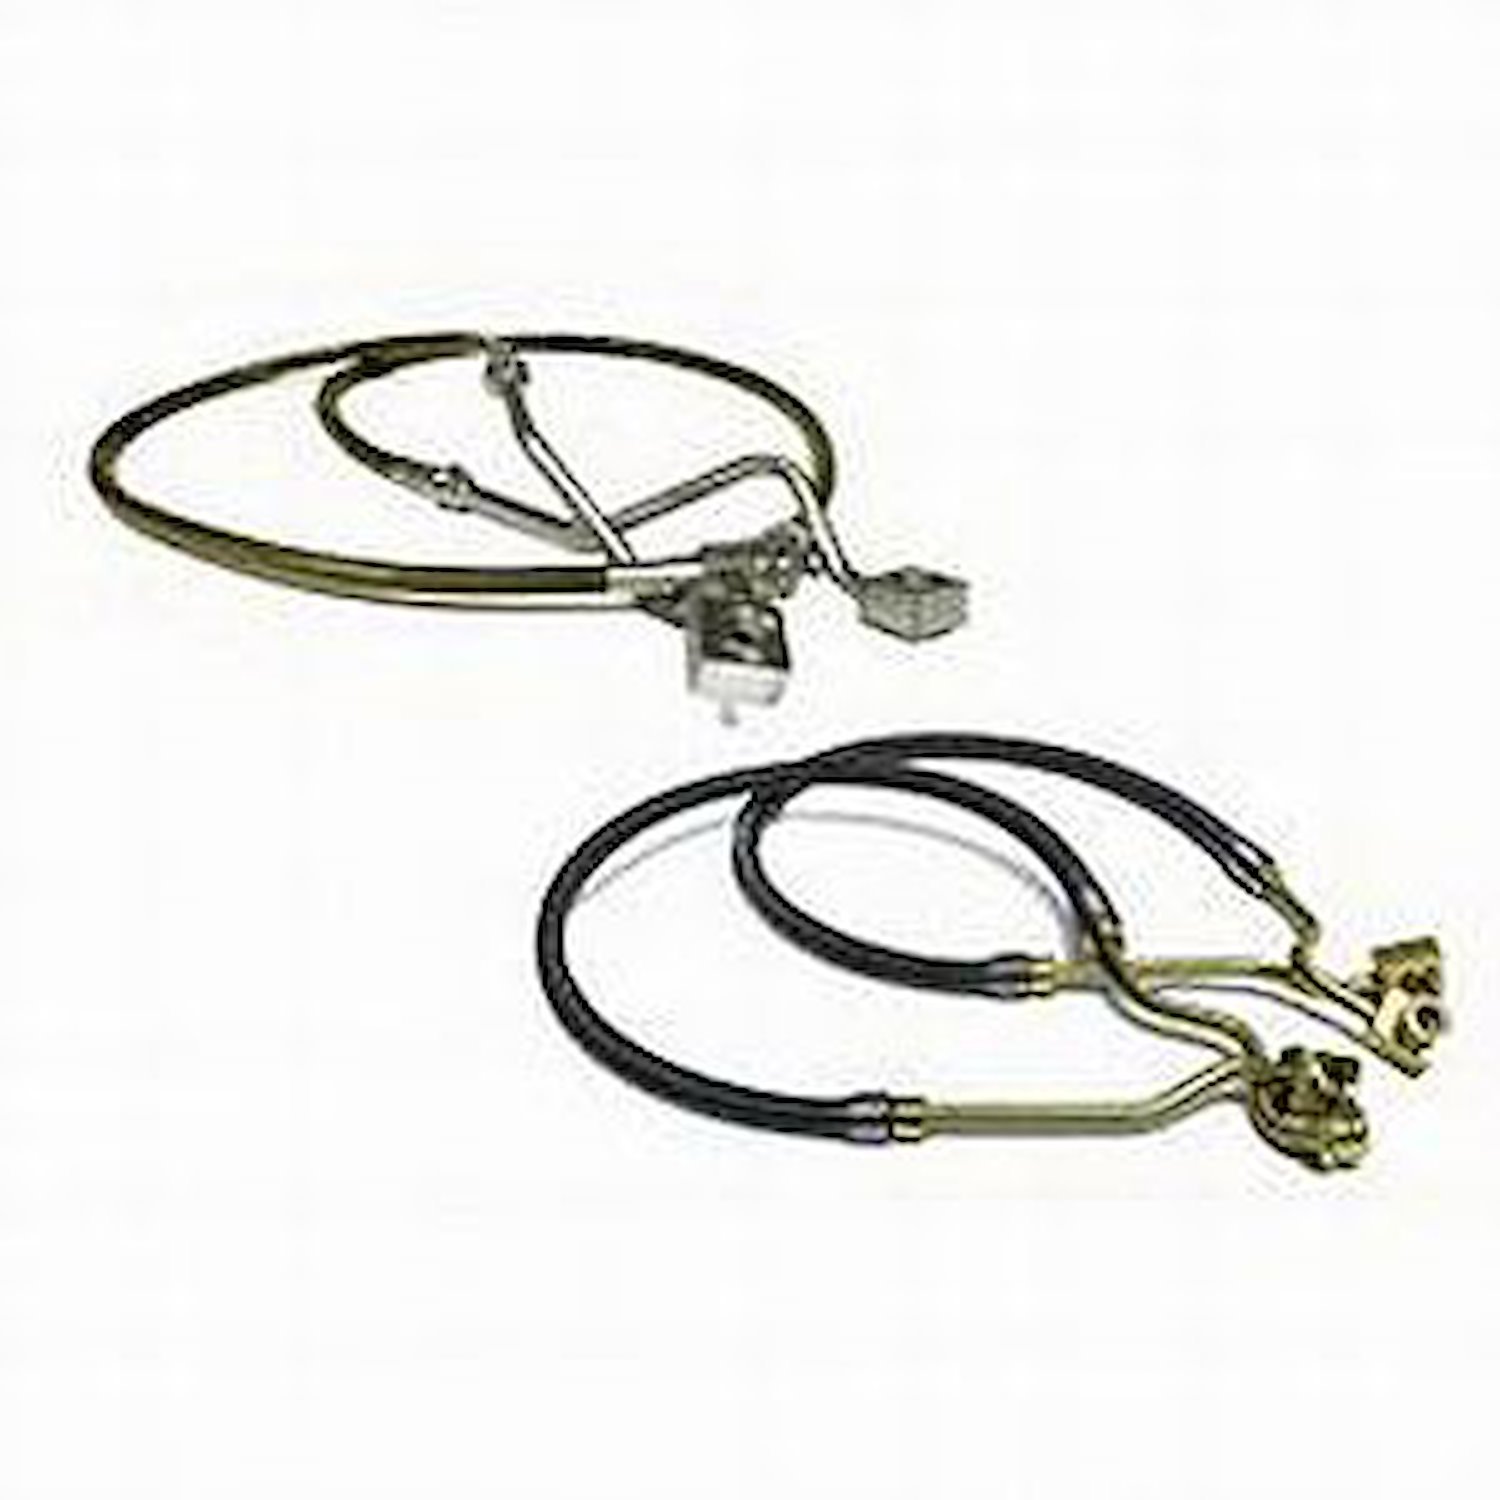 Bullet Proof Kevlar  Brake Hose Front Reinforced Braided Stainless Steel Length Over Stock 9 in. Vehicles w/8-12 in. Lift